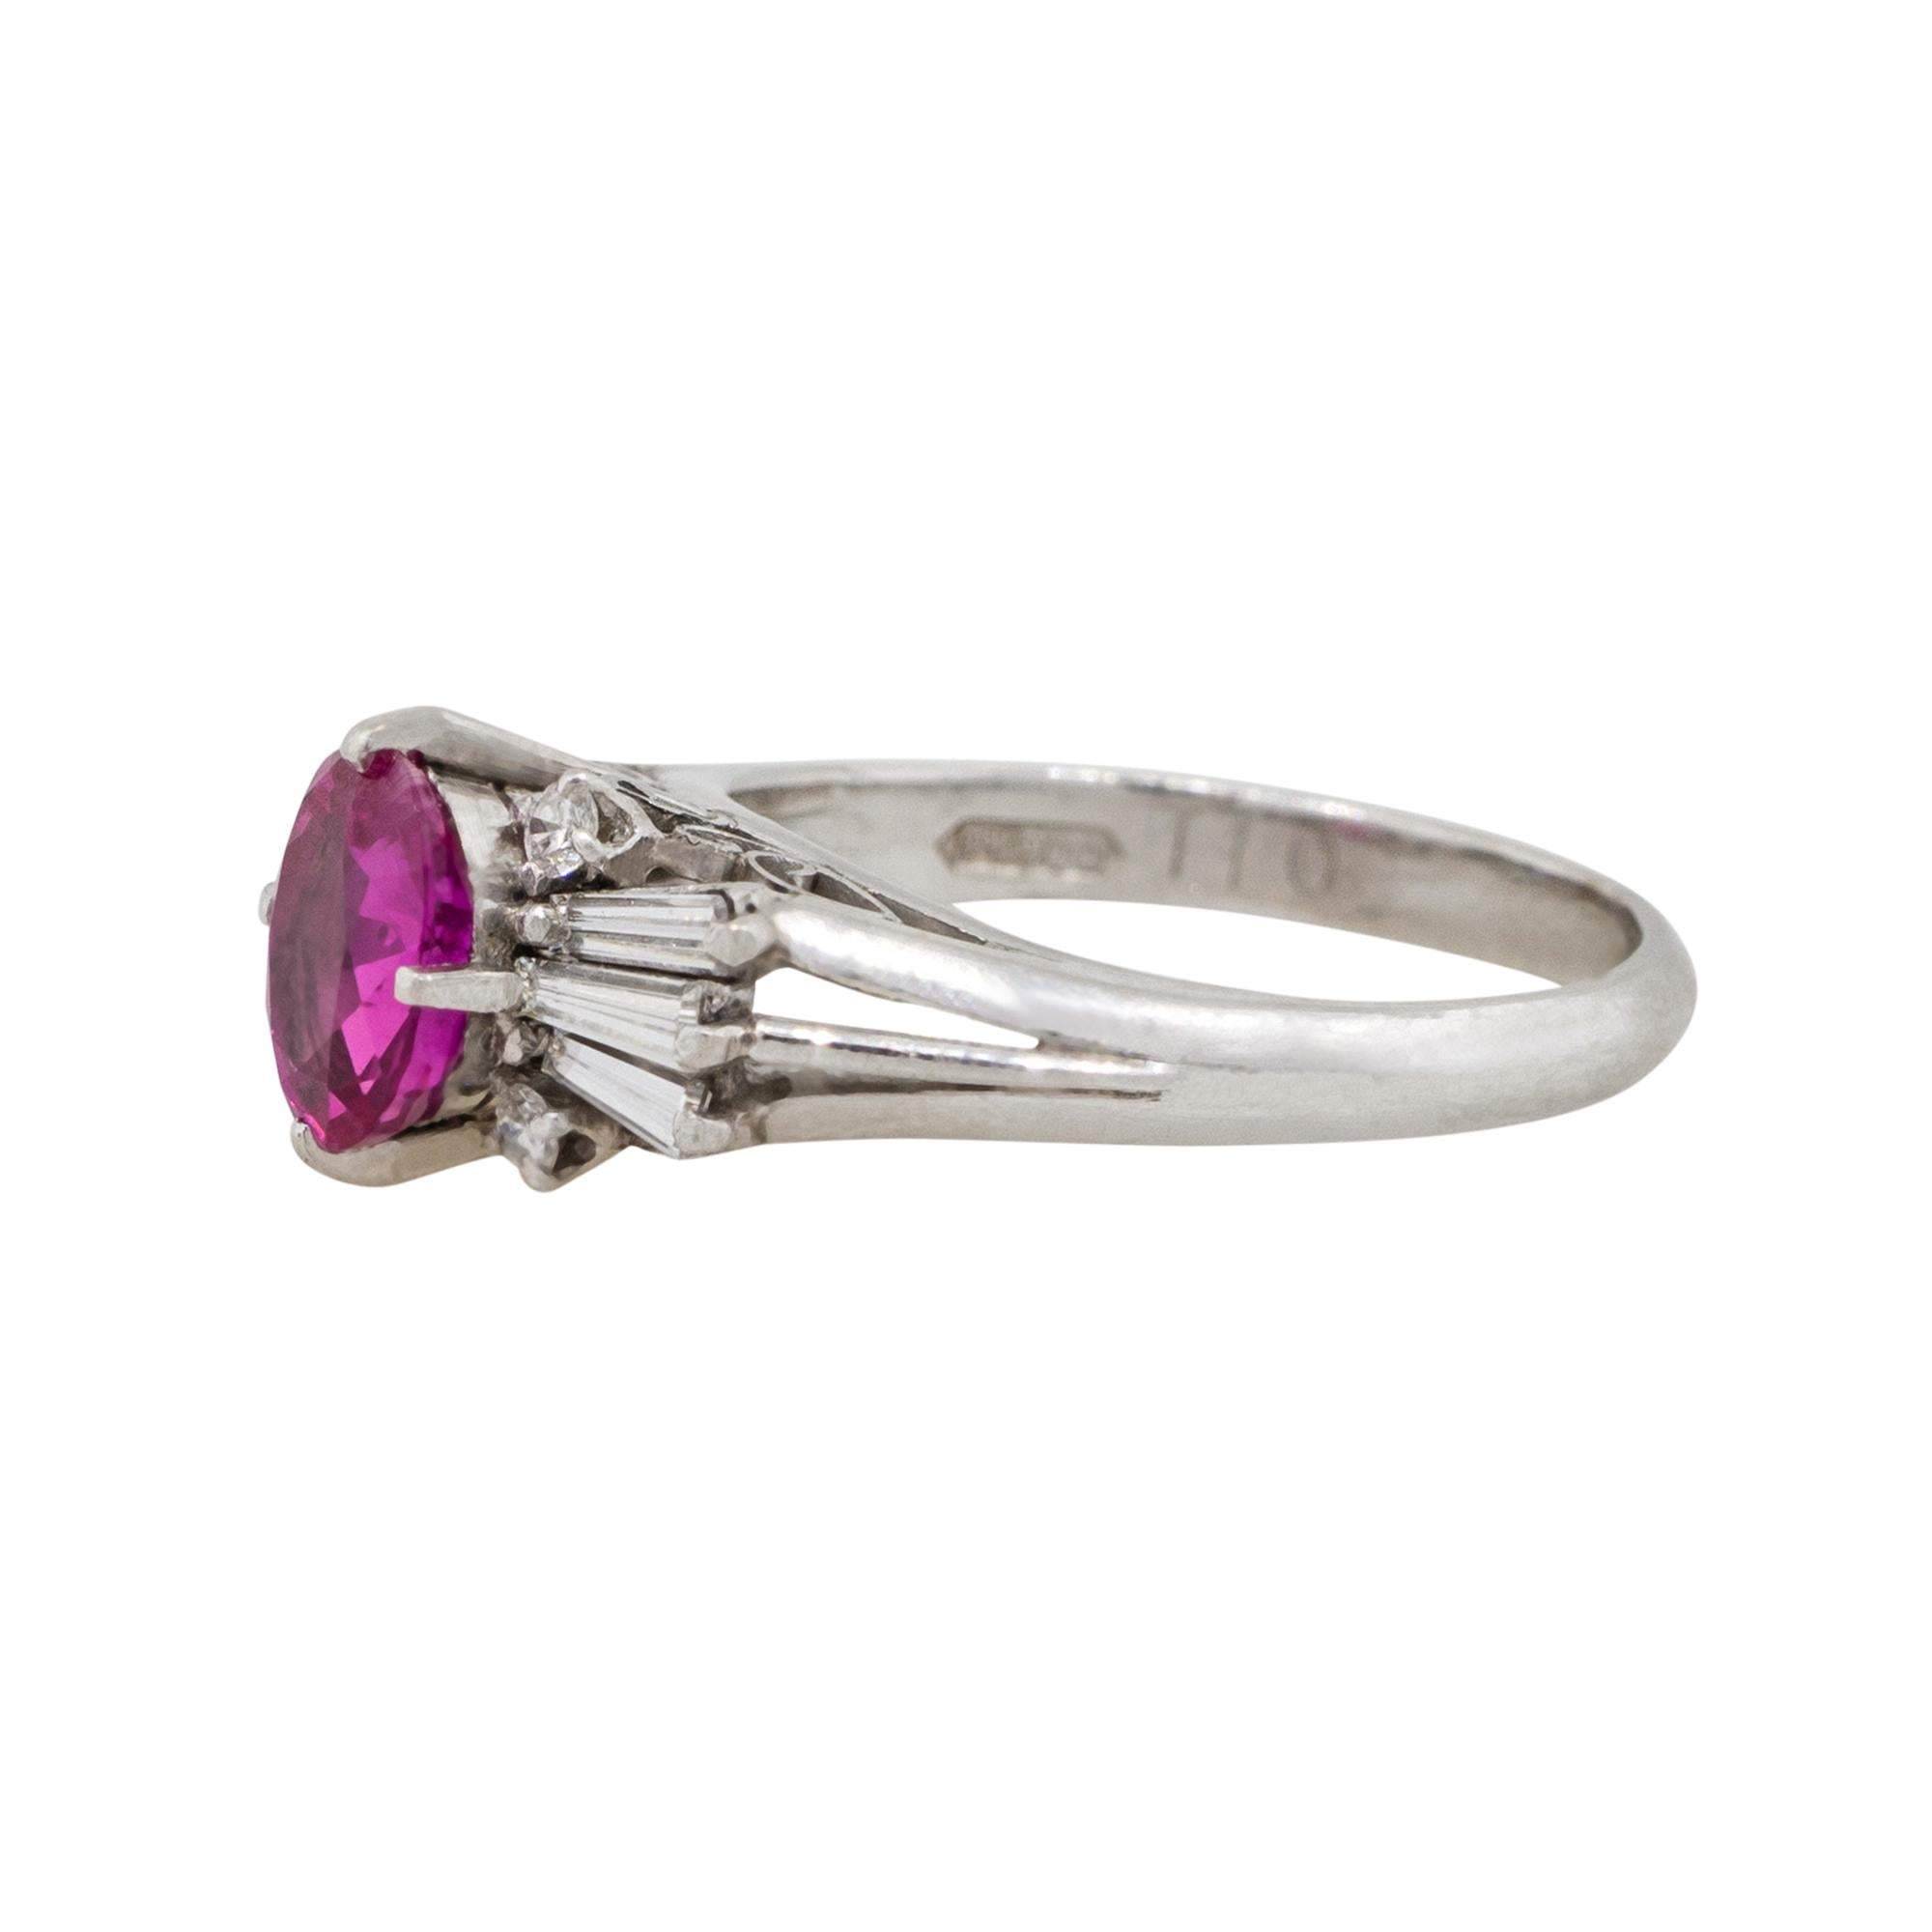 Material: Platinum
Gemstone details: Approx. 1.10ctw  oval shaped Ruby center gemstone
Diamond details: Approx. 0.34ctw of round and baguette cut Diamonds. Diamonds are G/H in color and VS in clarity
Ring Size: 4.75
Ring Measurements: 0.75